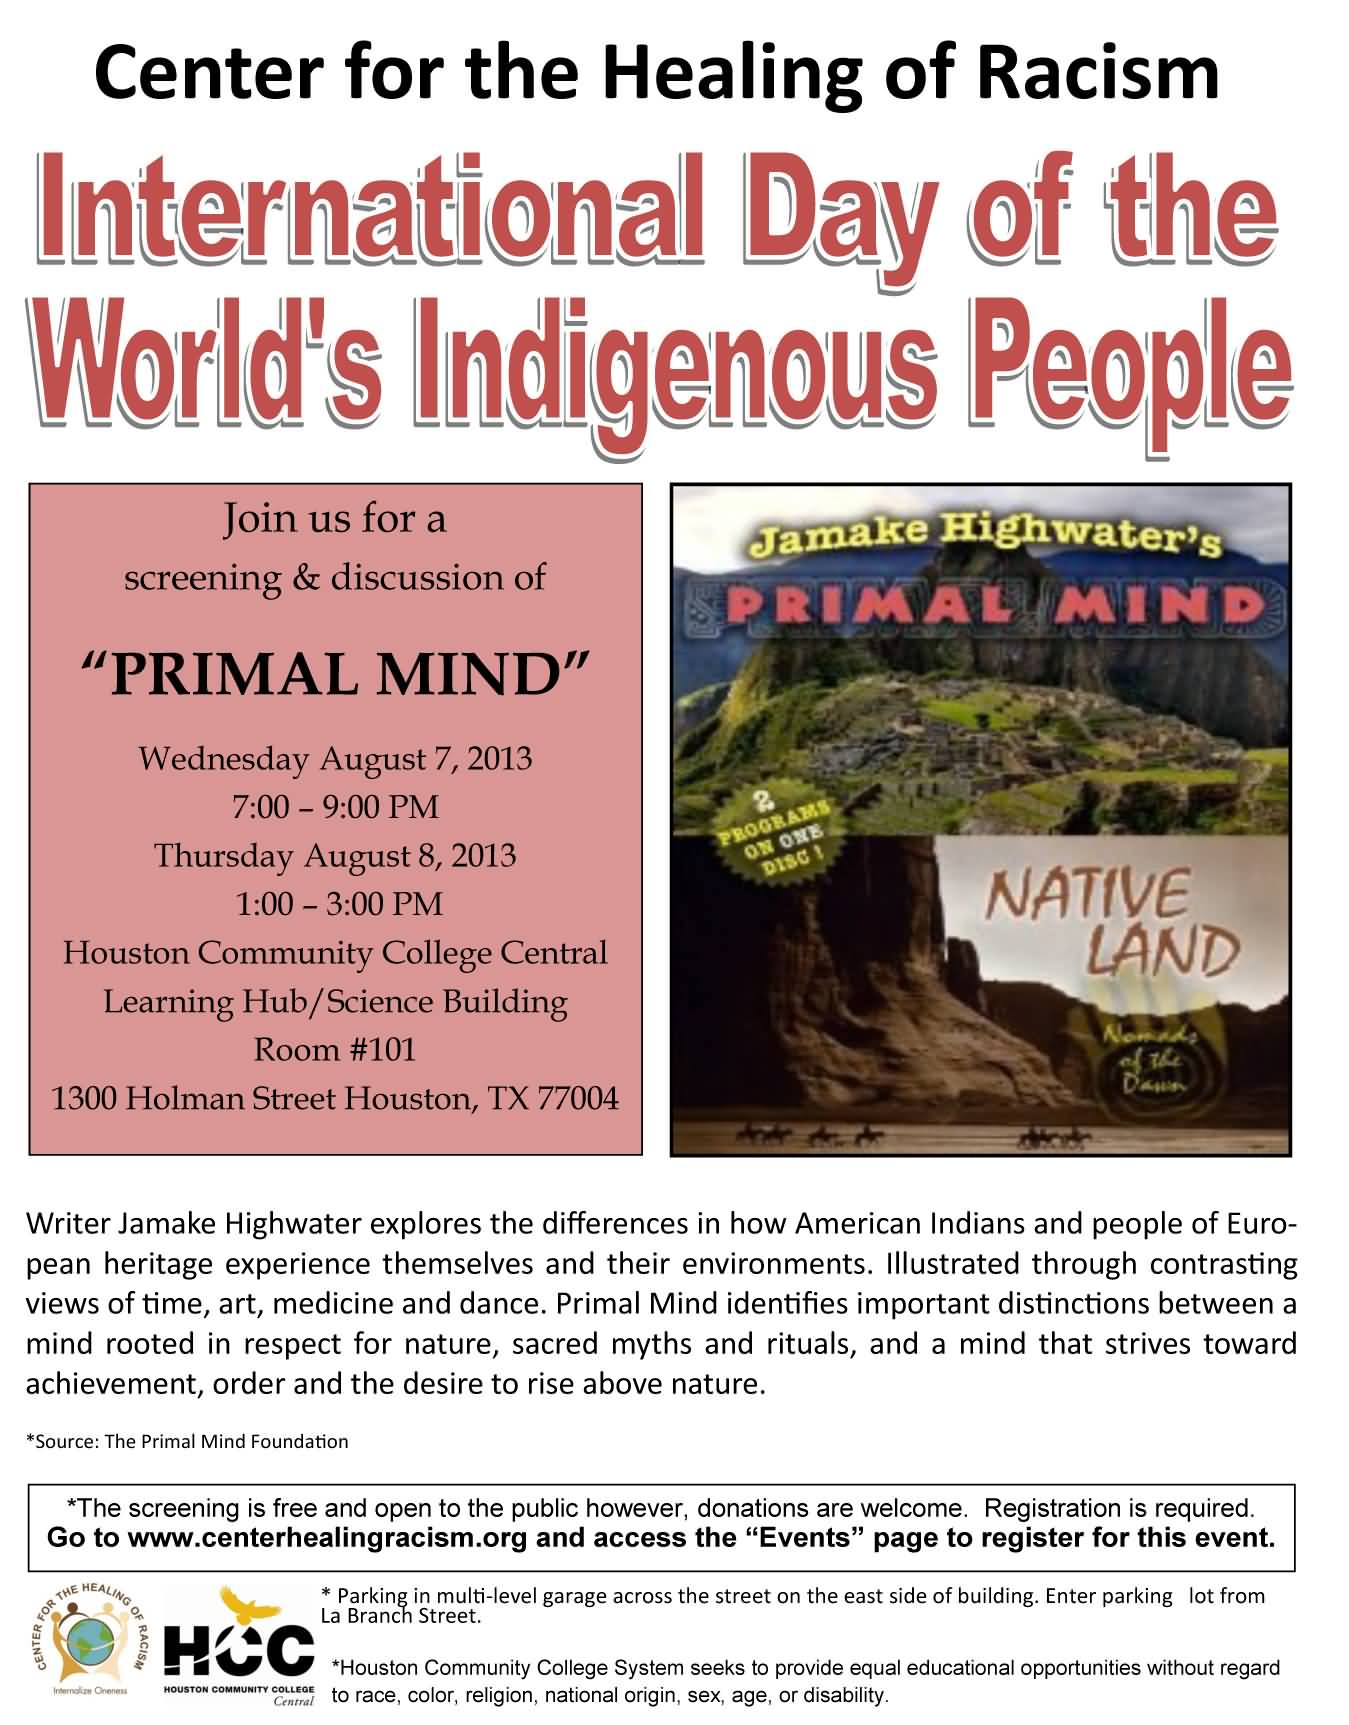 Center For The Healing Of Racism International Day of the World’s Indigenous People Poster